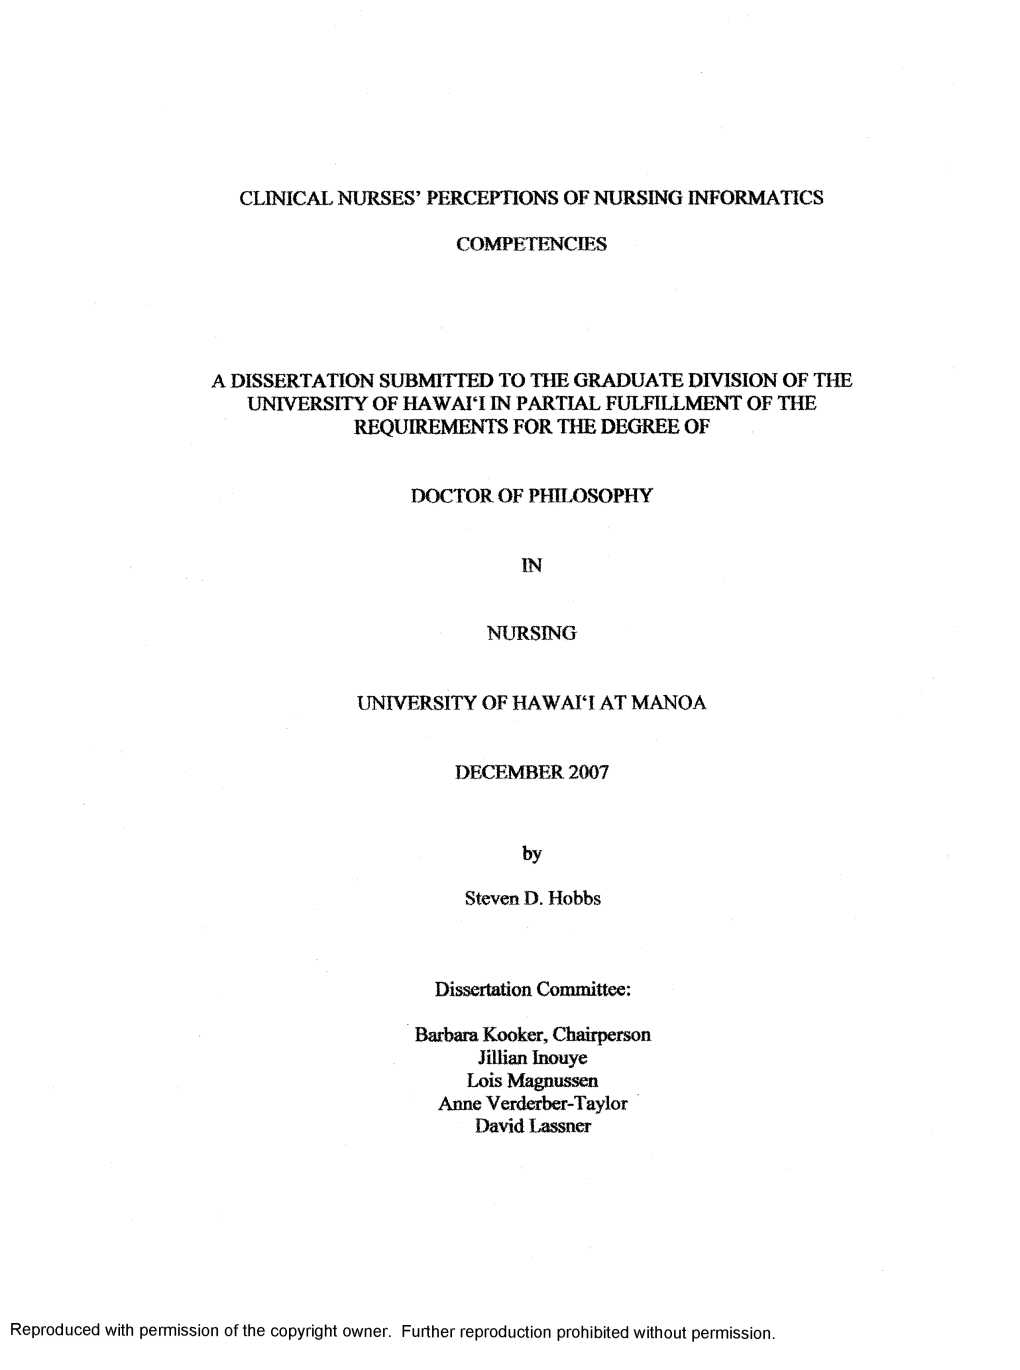 Clinical Nurses' Perceptions of Nursing Informatics Competencies a Dissertation Submitted to the Graduate Division of the Univ